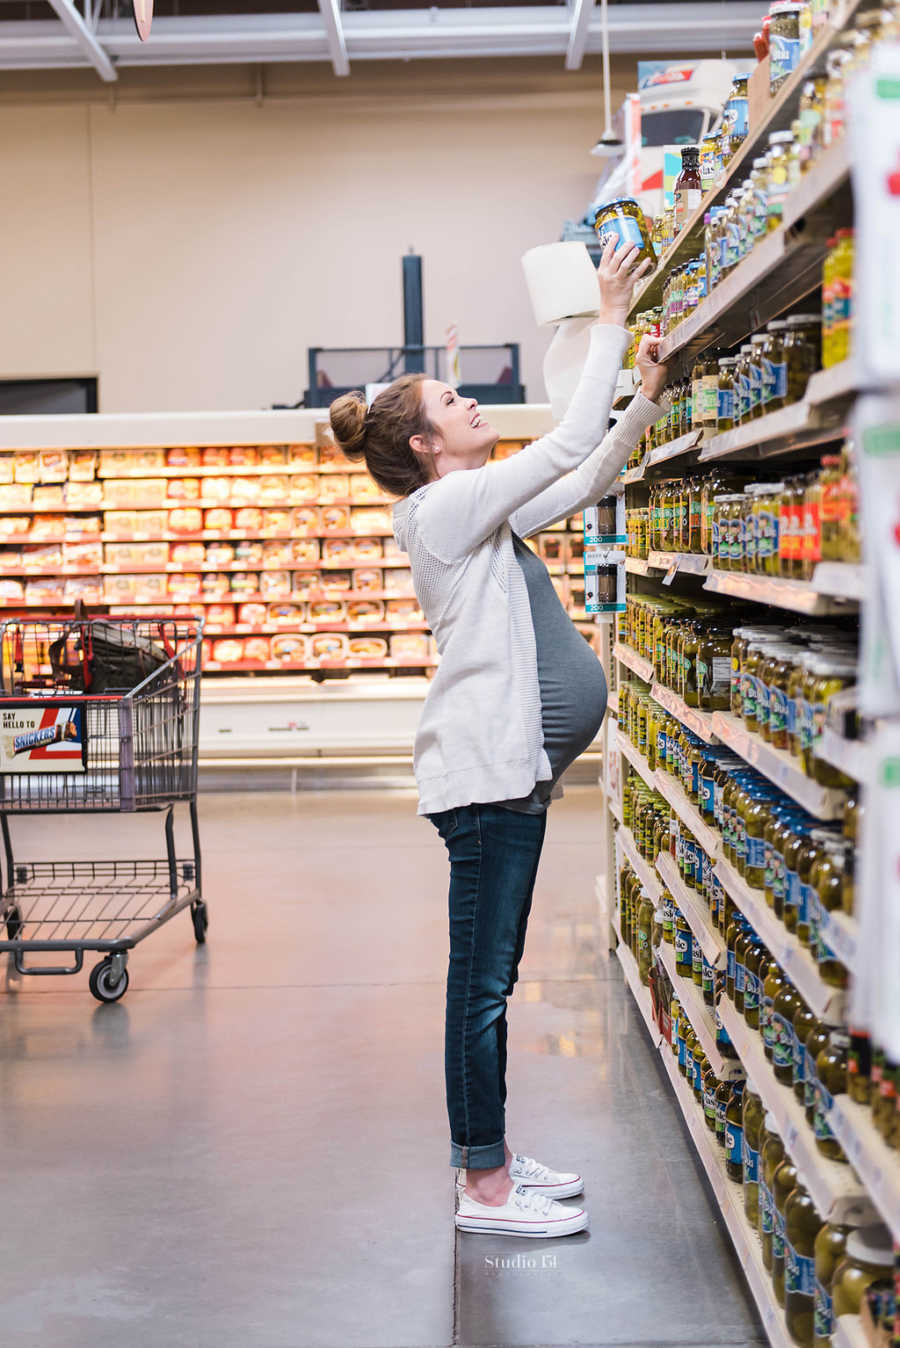 Pregnant woman reaching for jar of pickles in grocery store